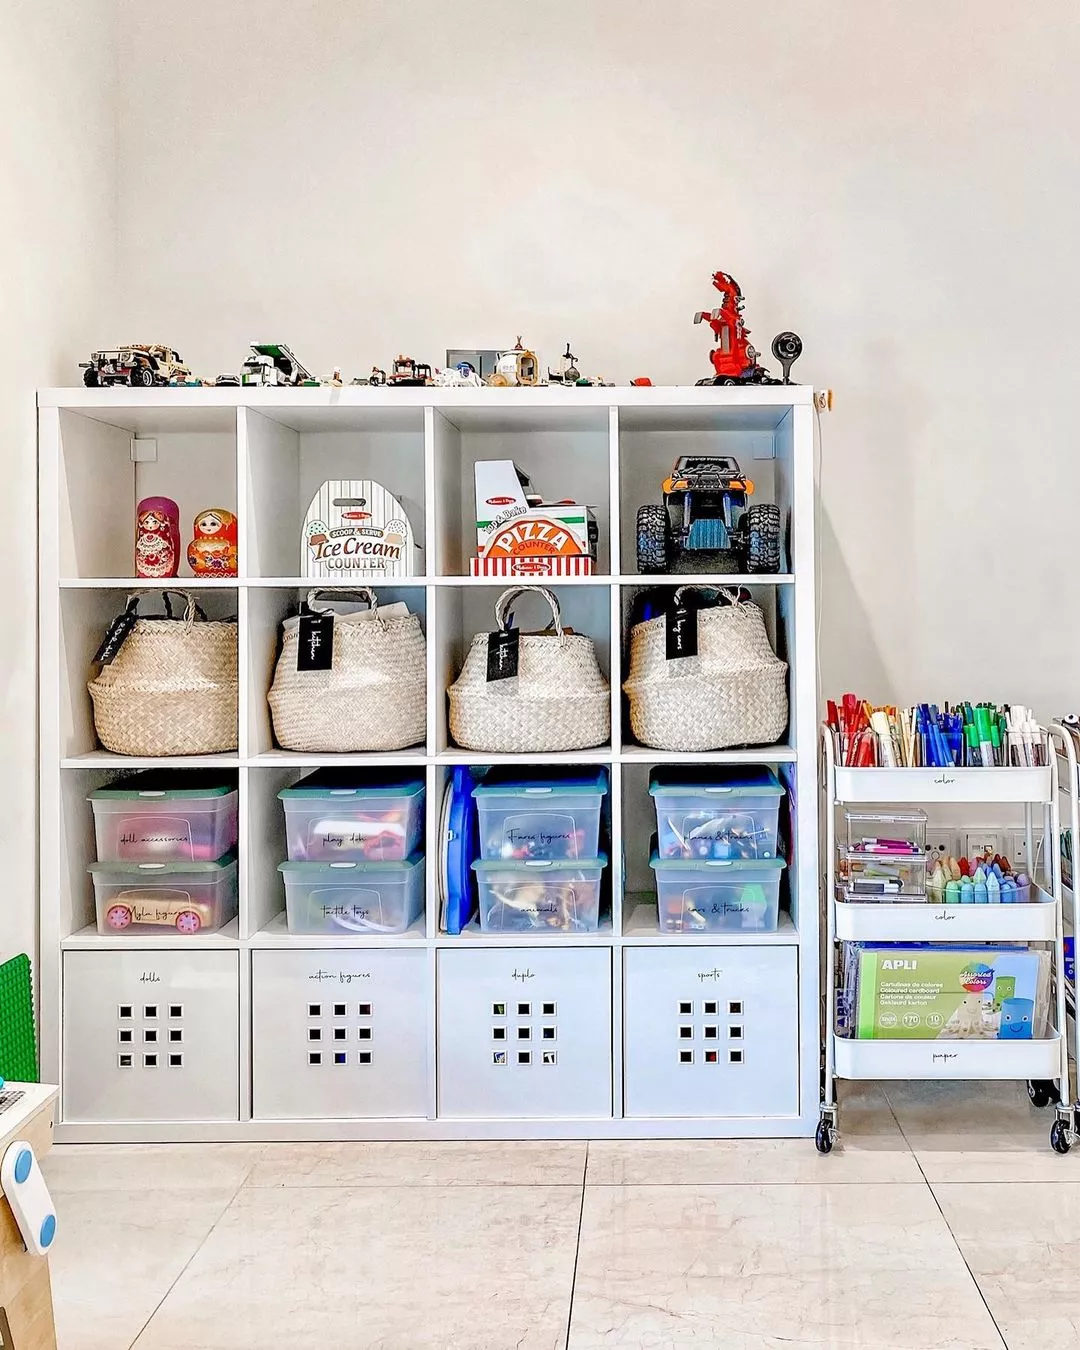 https://www.extraspace.com/blog/wp-content/uploads/2018/01/small-kids-room-ideas-keep-some-toys-out-of-reach.jpeg.webp